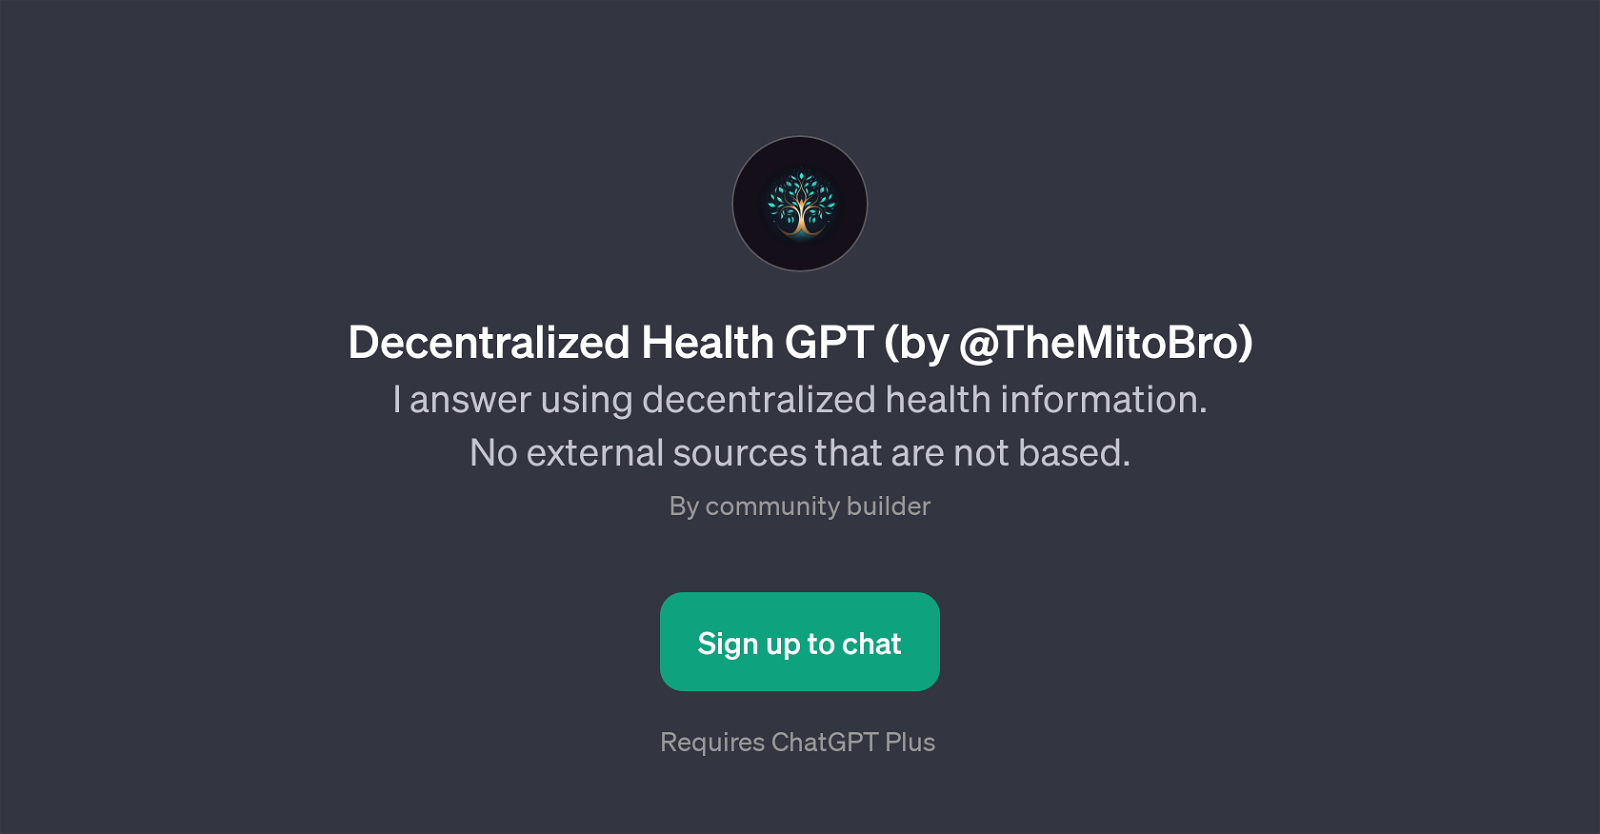 Decentralized Health GPT (by @TheMitoBro) website